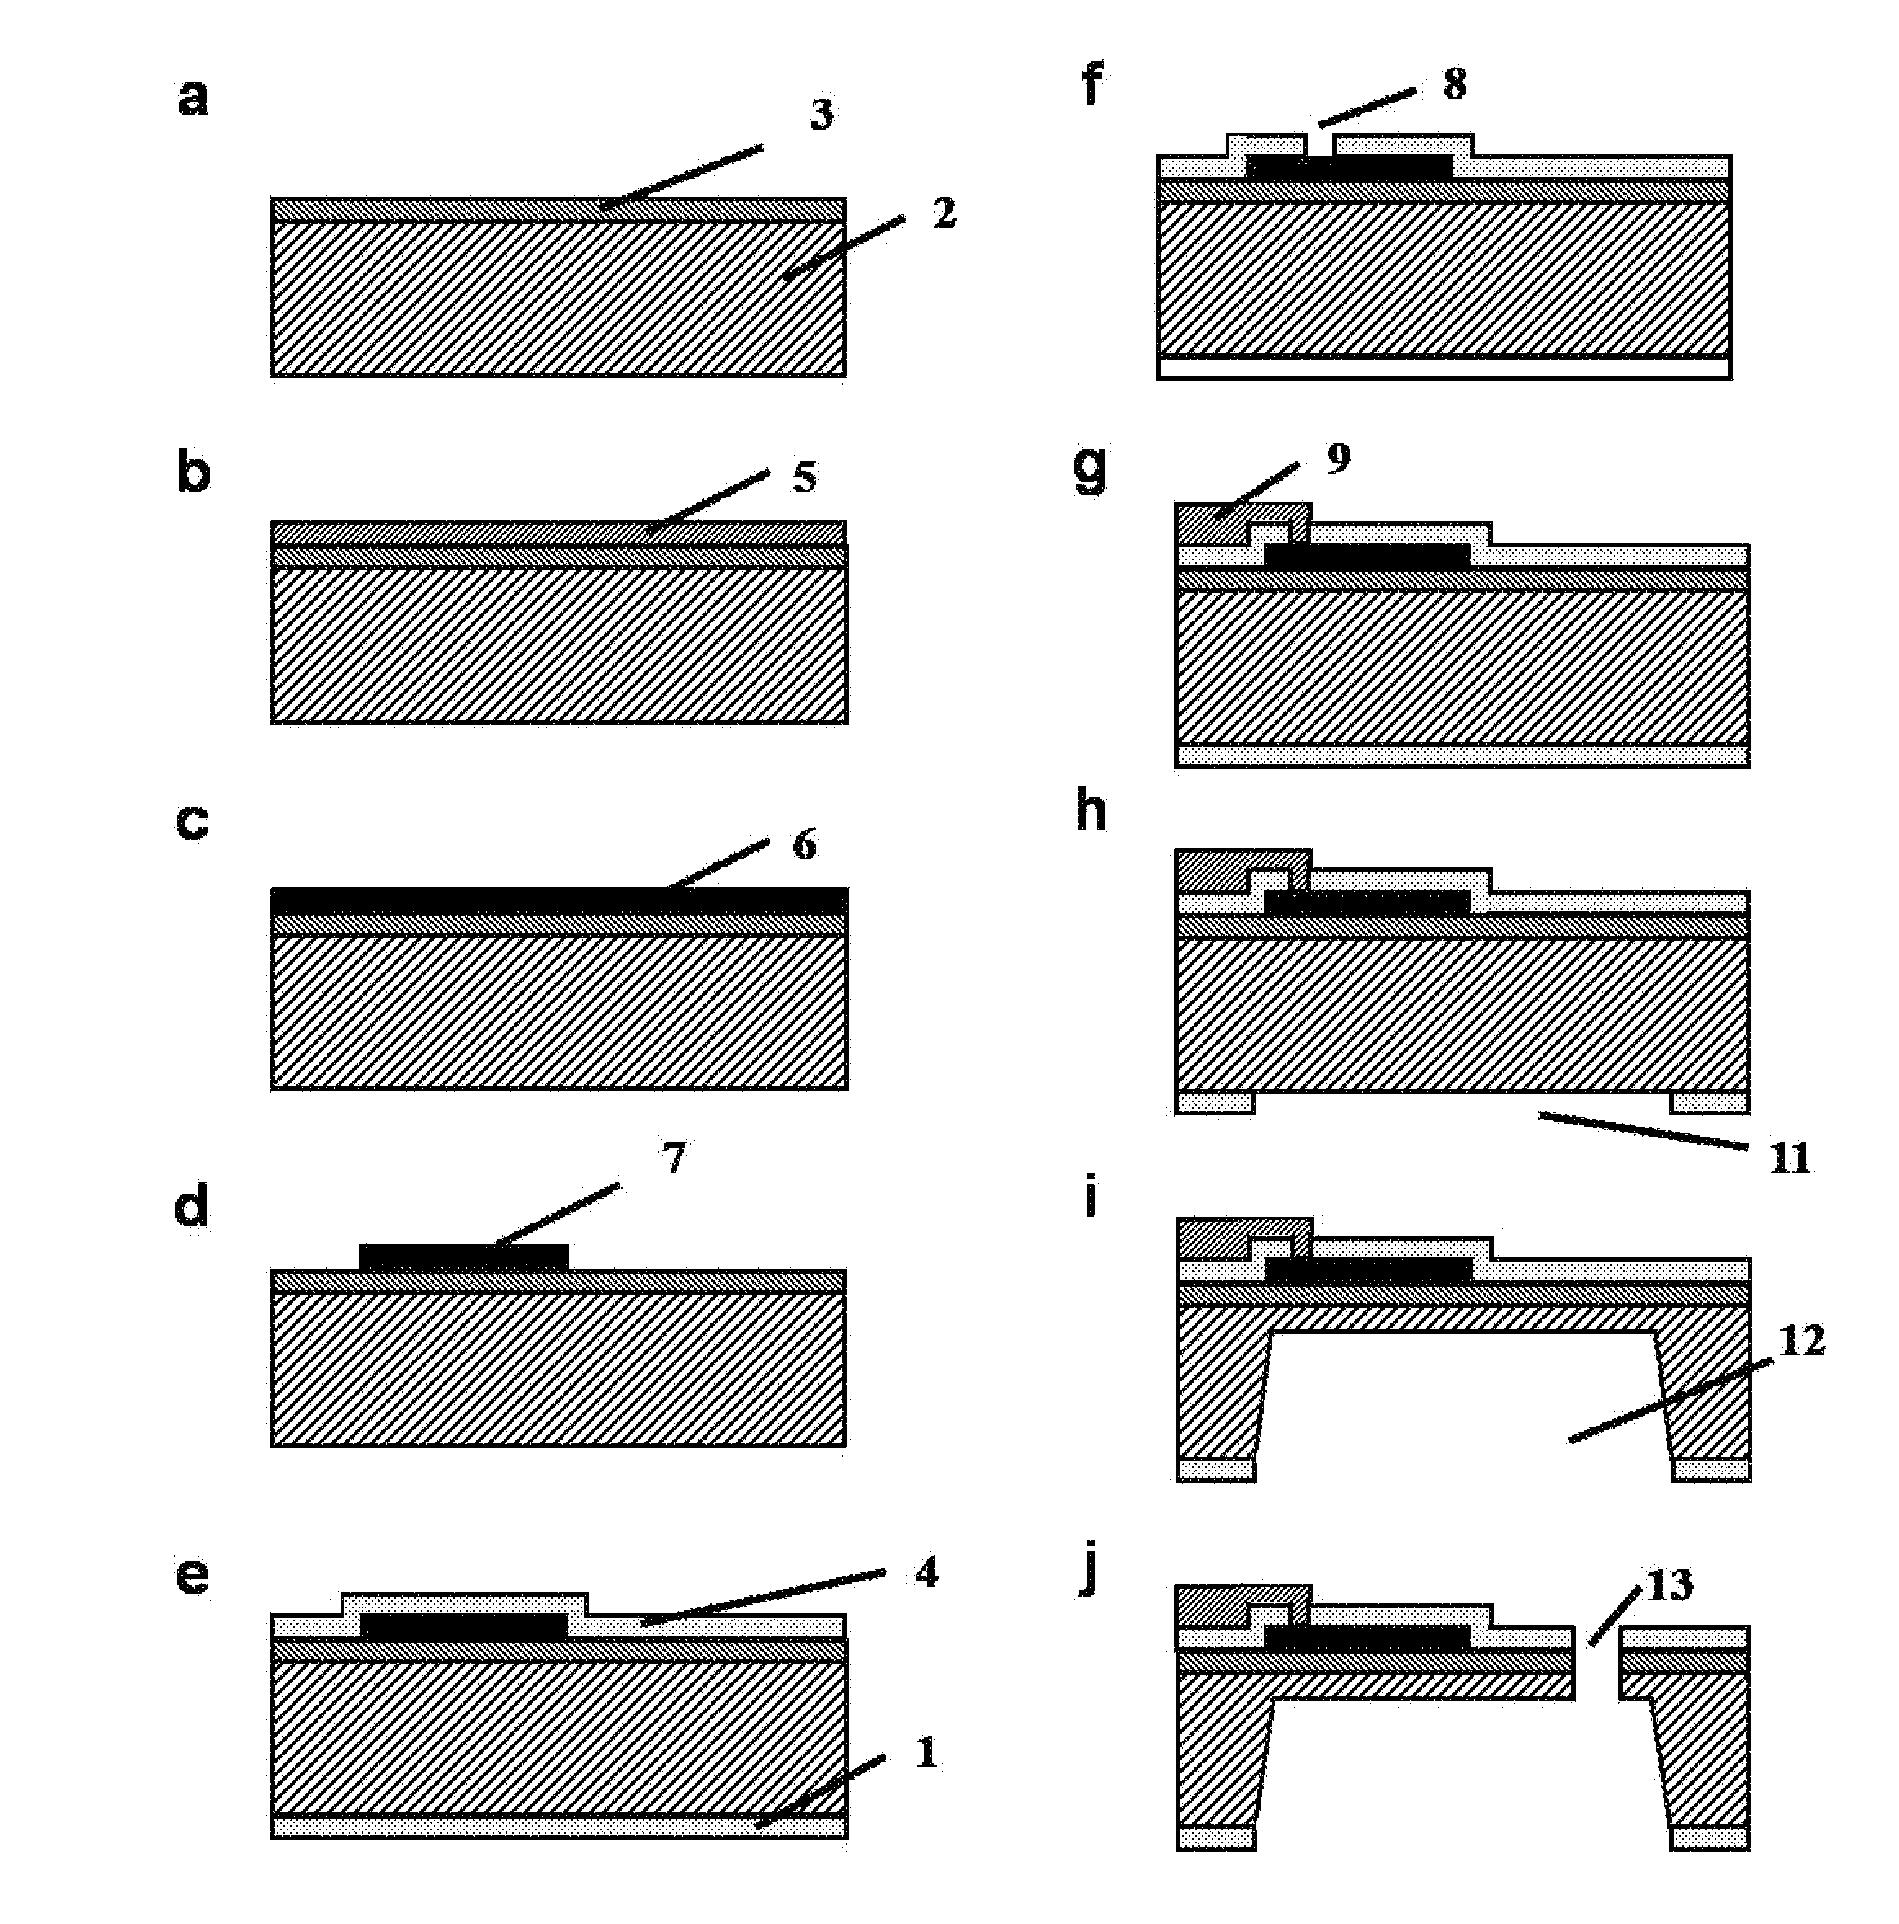 Sensor for quantitative measurement of electromechanical properties and microstructure of nano-materials and method for making the same